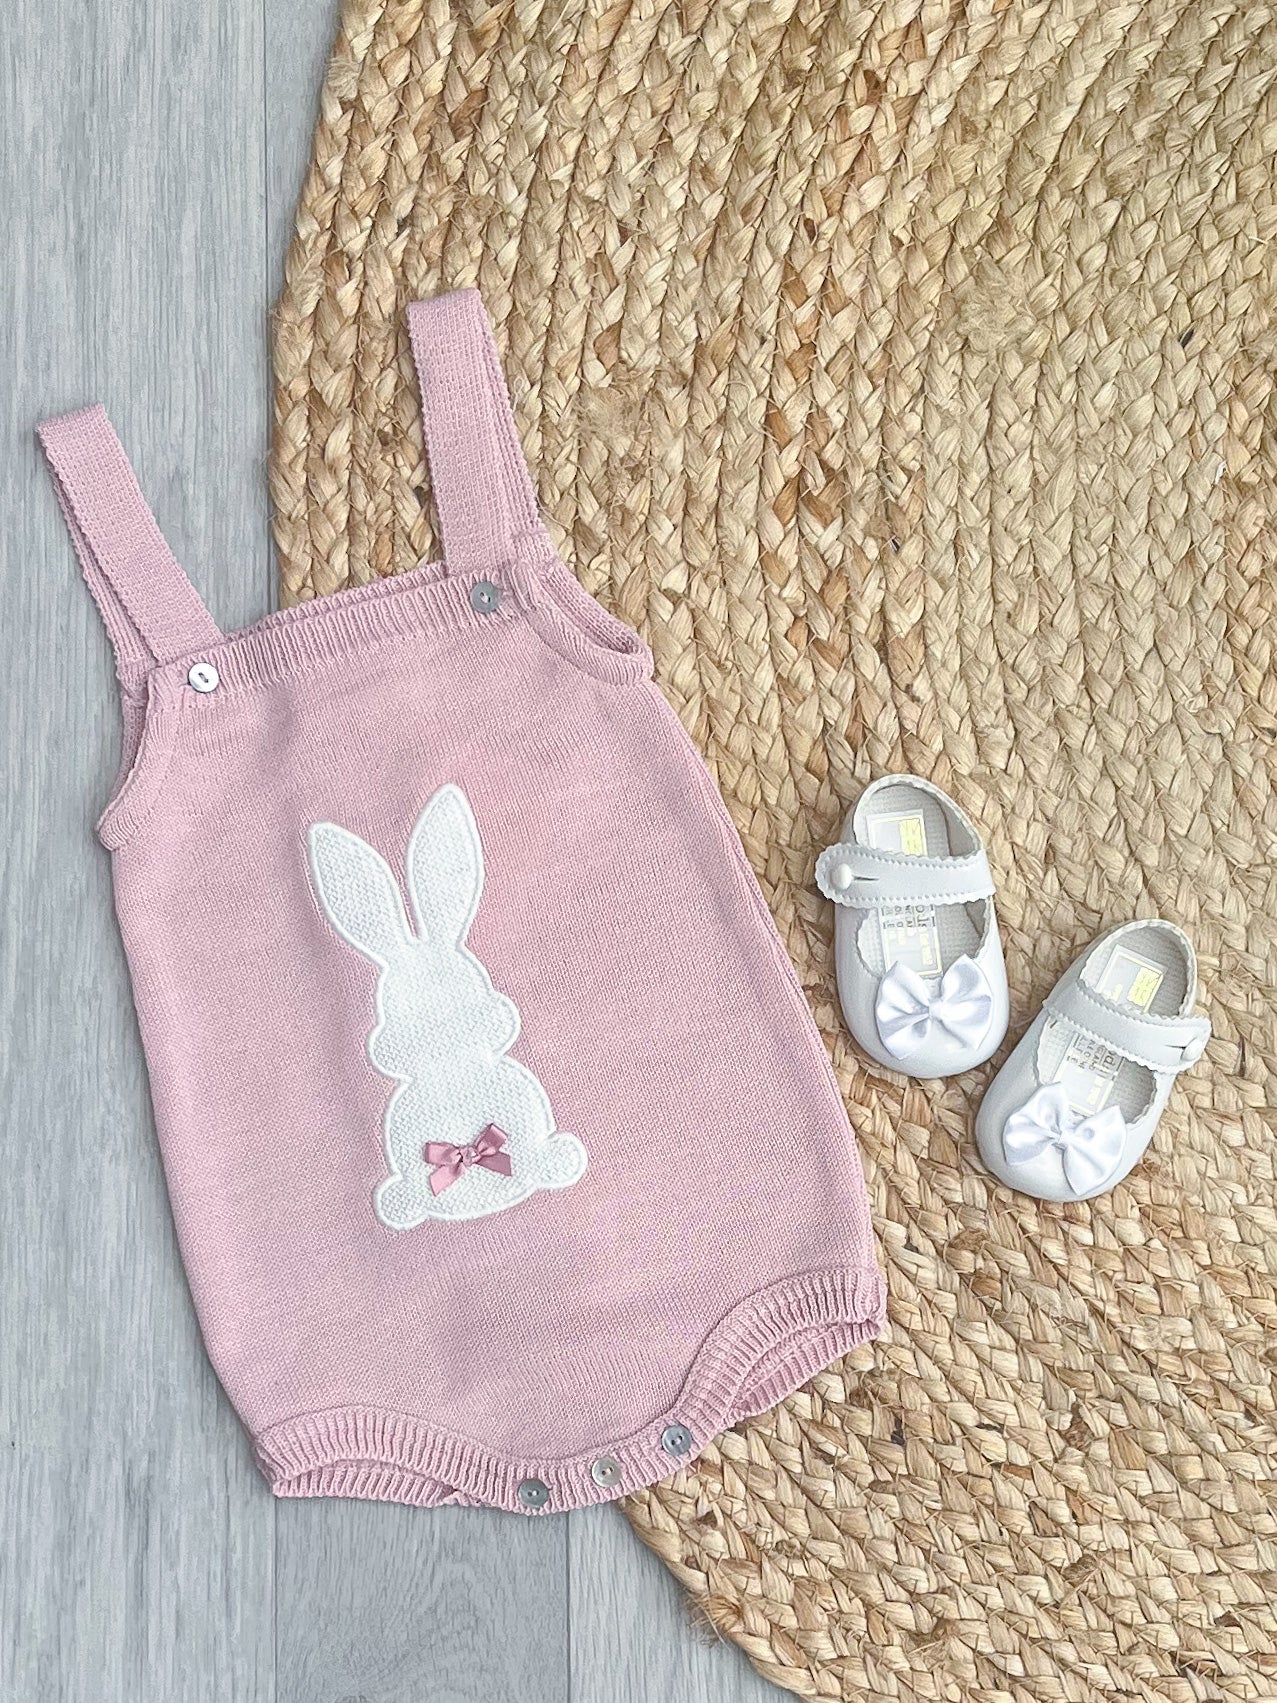 Blush pink bunny romper with white bow pram shoes on a brown wicker rug.